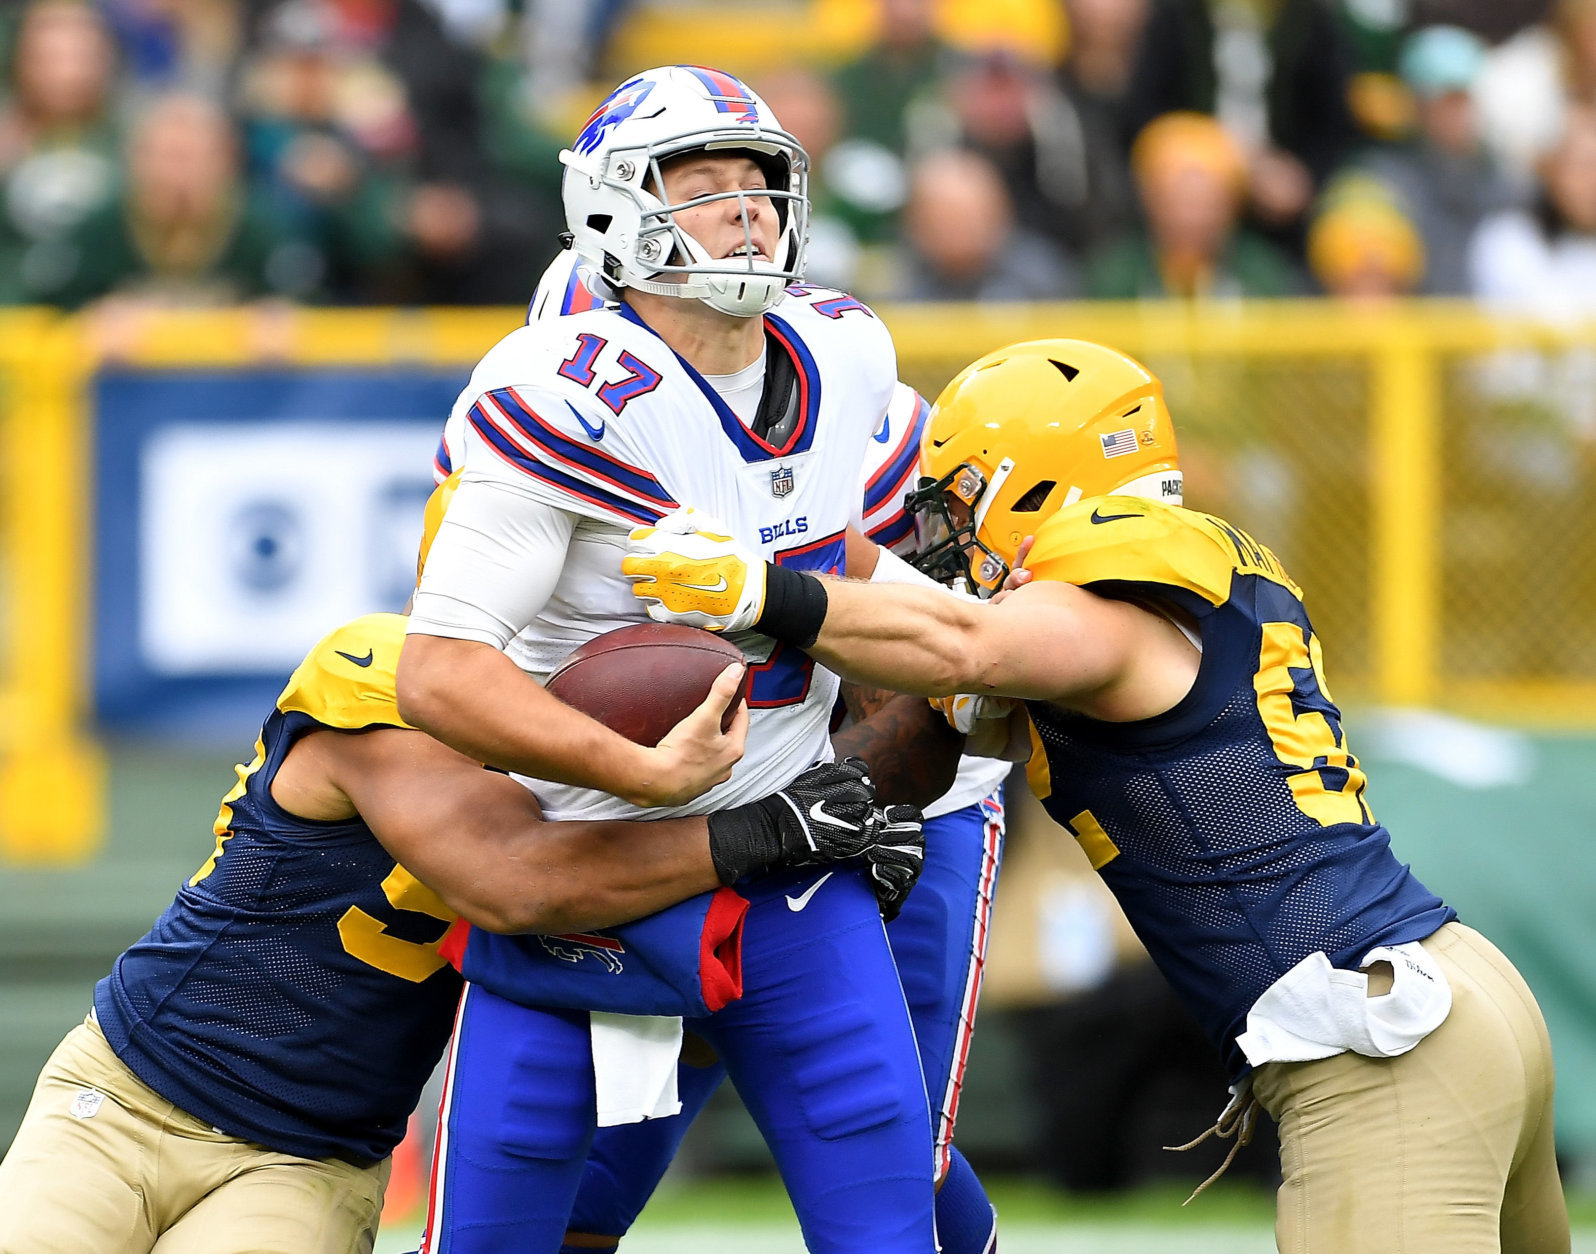 GREEN BAY, WI - SEPTEMBER 30:  Josh Allen #17 of the Buffalo Bills is sacked by Nick Perry #53 of the Green Bay Packers and Clay Matthews #52 during the second quarter of a game at Lambeau Field on September 30, 2018 in Green Bay, Wisconsin.  (Photo by Stacy Revere/Getty Images)